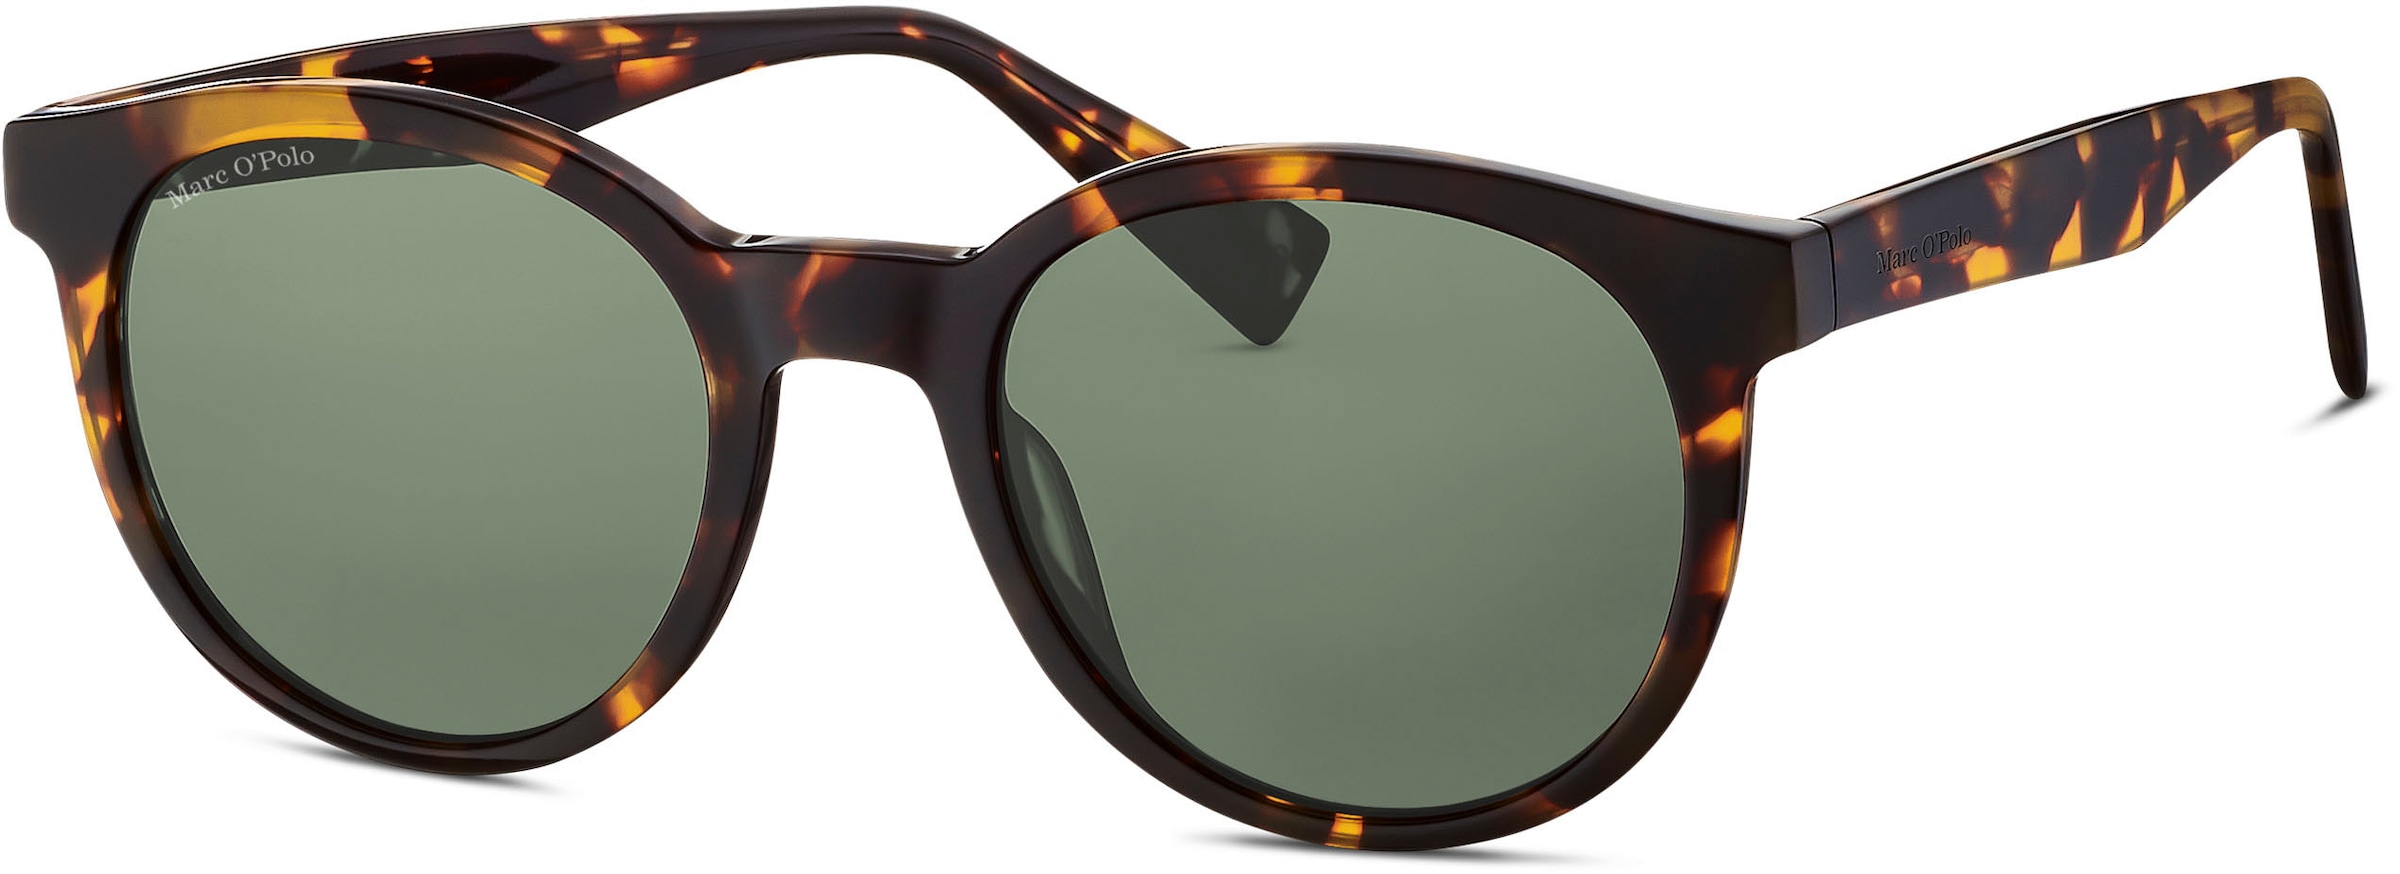 Marc O'Polo Sonnenbrille »Modell 506185«, Panto-Form online kaufen